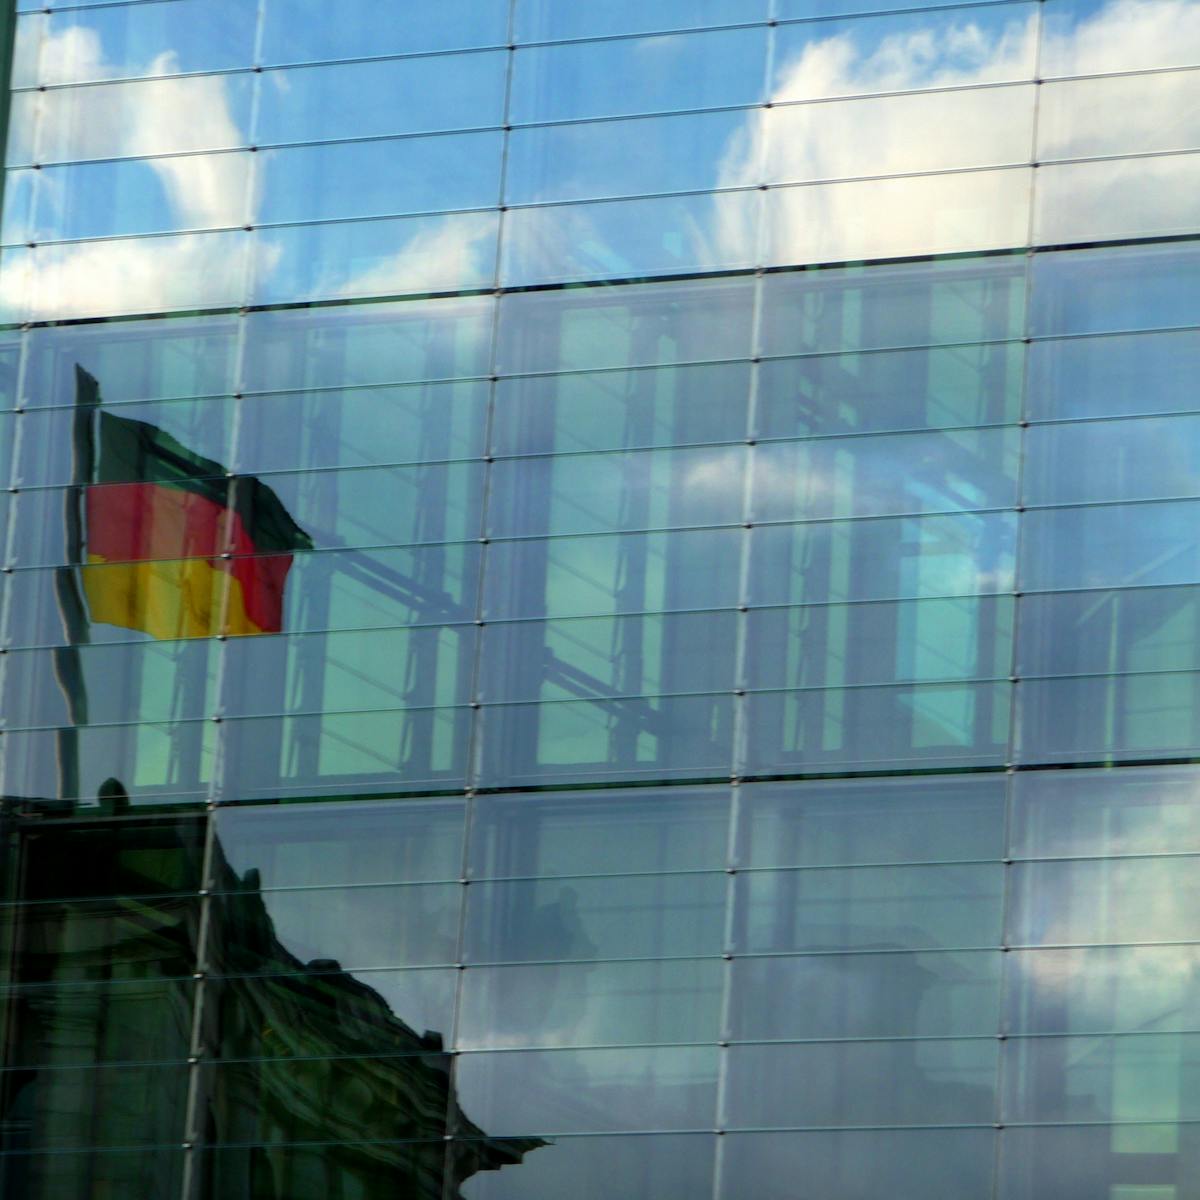 German merger and acquisition law grants control of cash to the acquirer only if it picks up at least 75% of the target company&rsquo;s stock. At 59.3%, ams governs Osram, but doesn&rsquo;t control the cash. (Photo credit: Image by Helmut Jungclaus via Pixabay; used under free license for commercial or noncommercial purposes.)